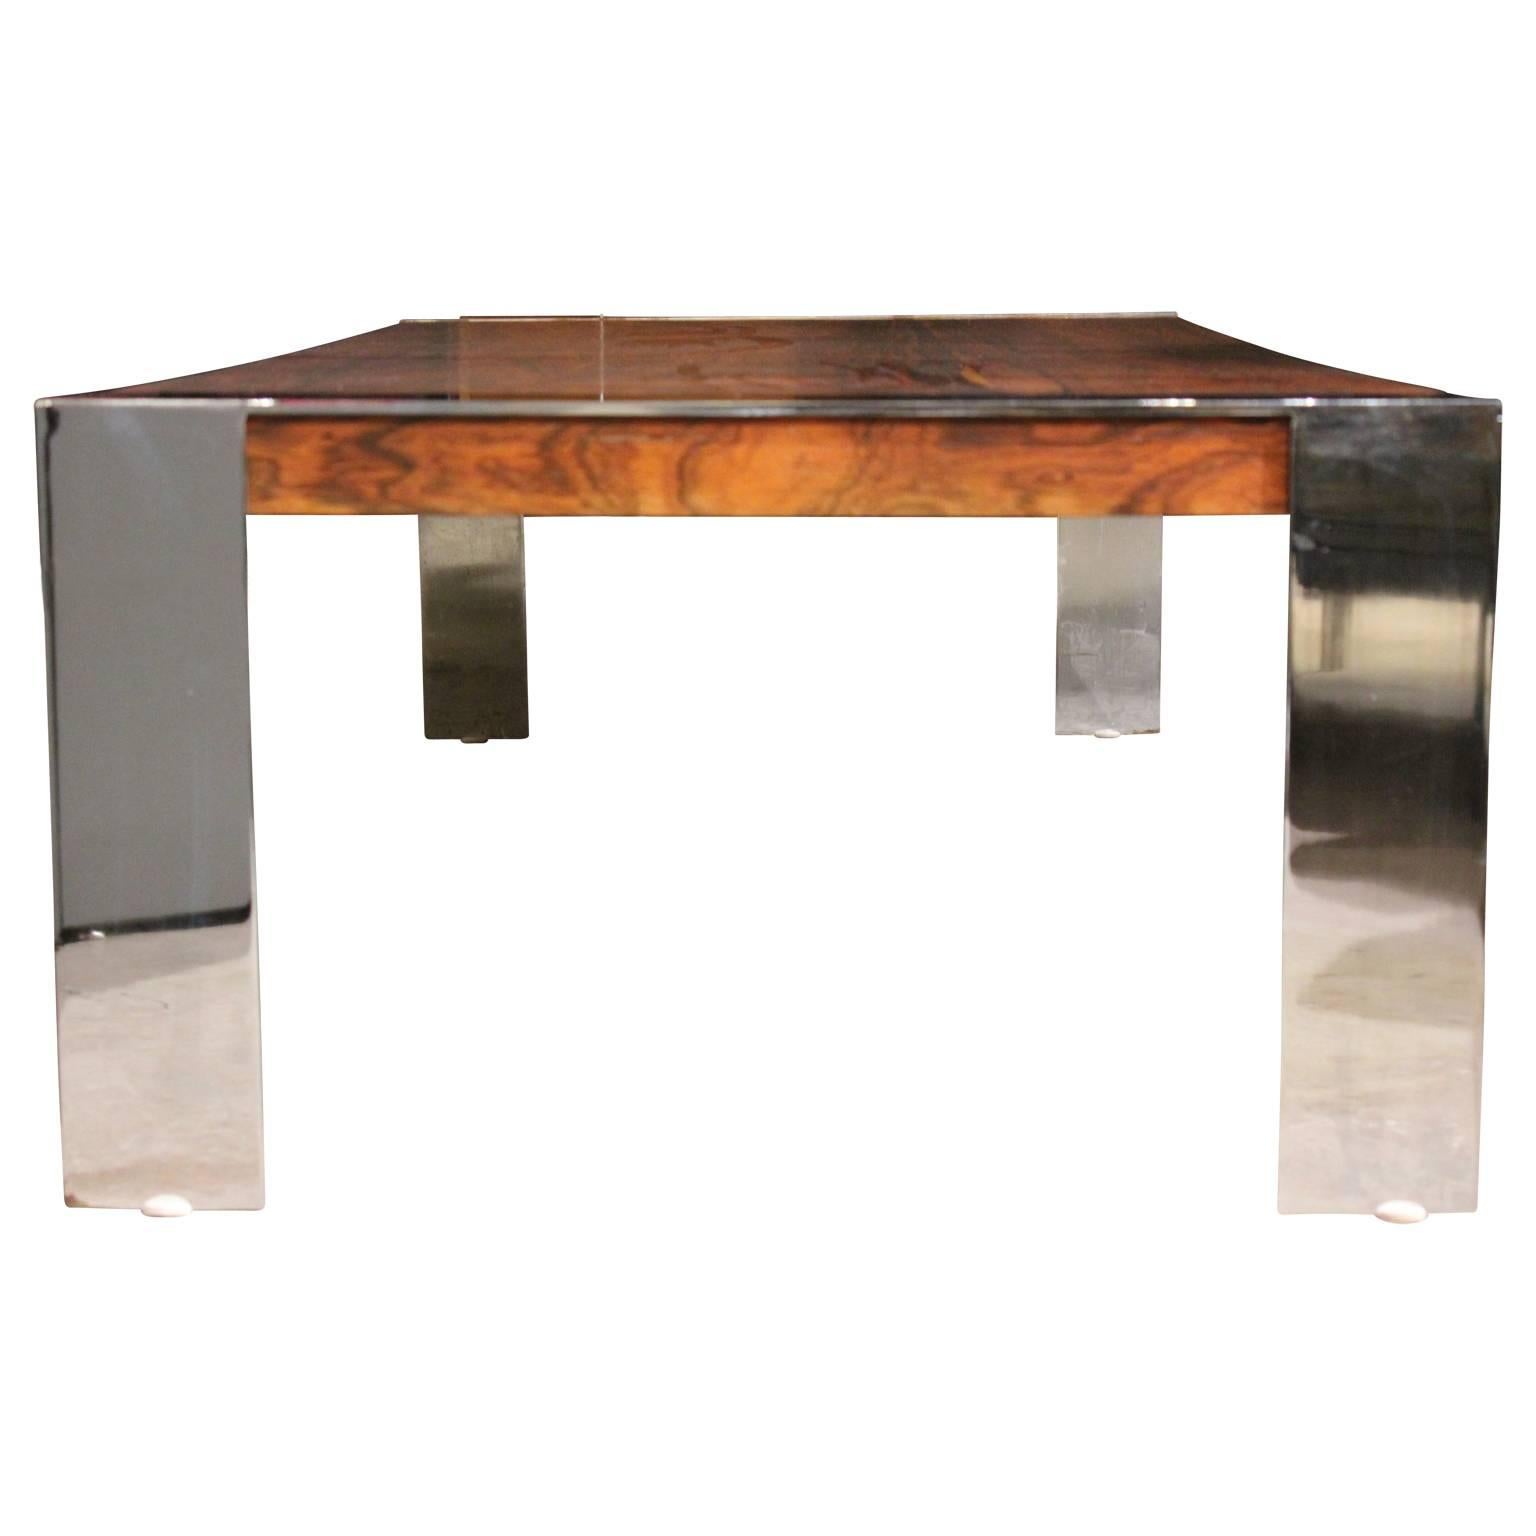 Mid-20th Century Modern Rosewood Chrome Rectangular Coffee Table by Flair